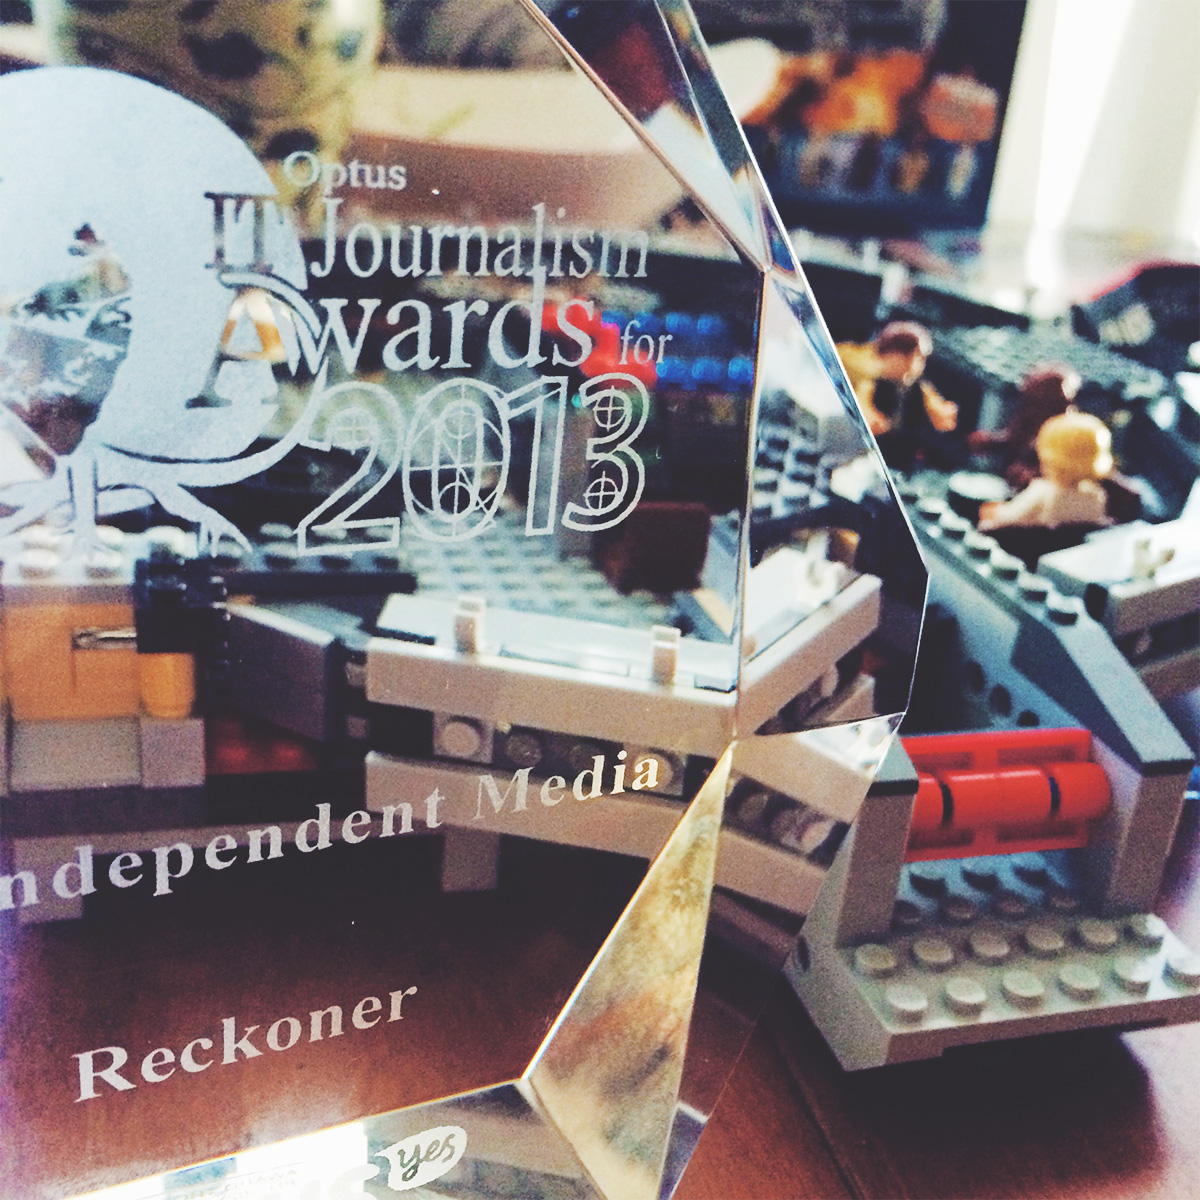 Trophy from the IT Journalism Awards 2013